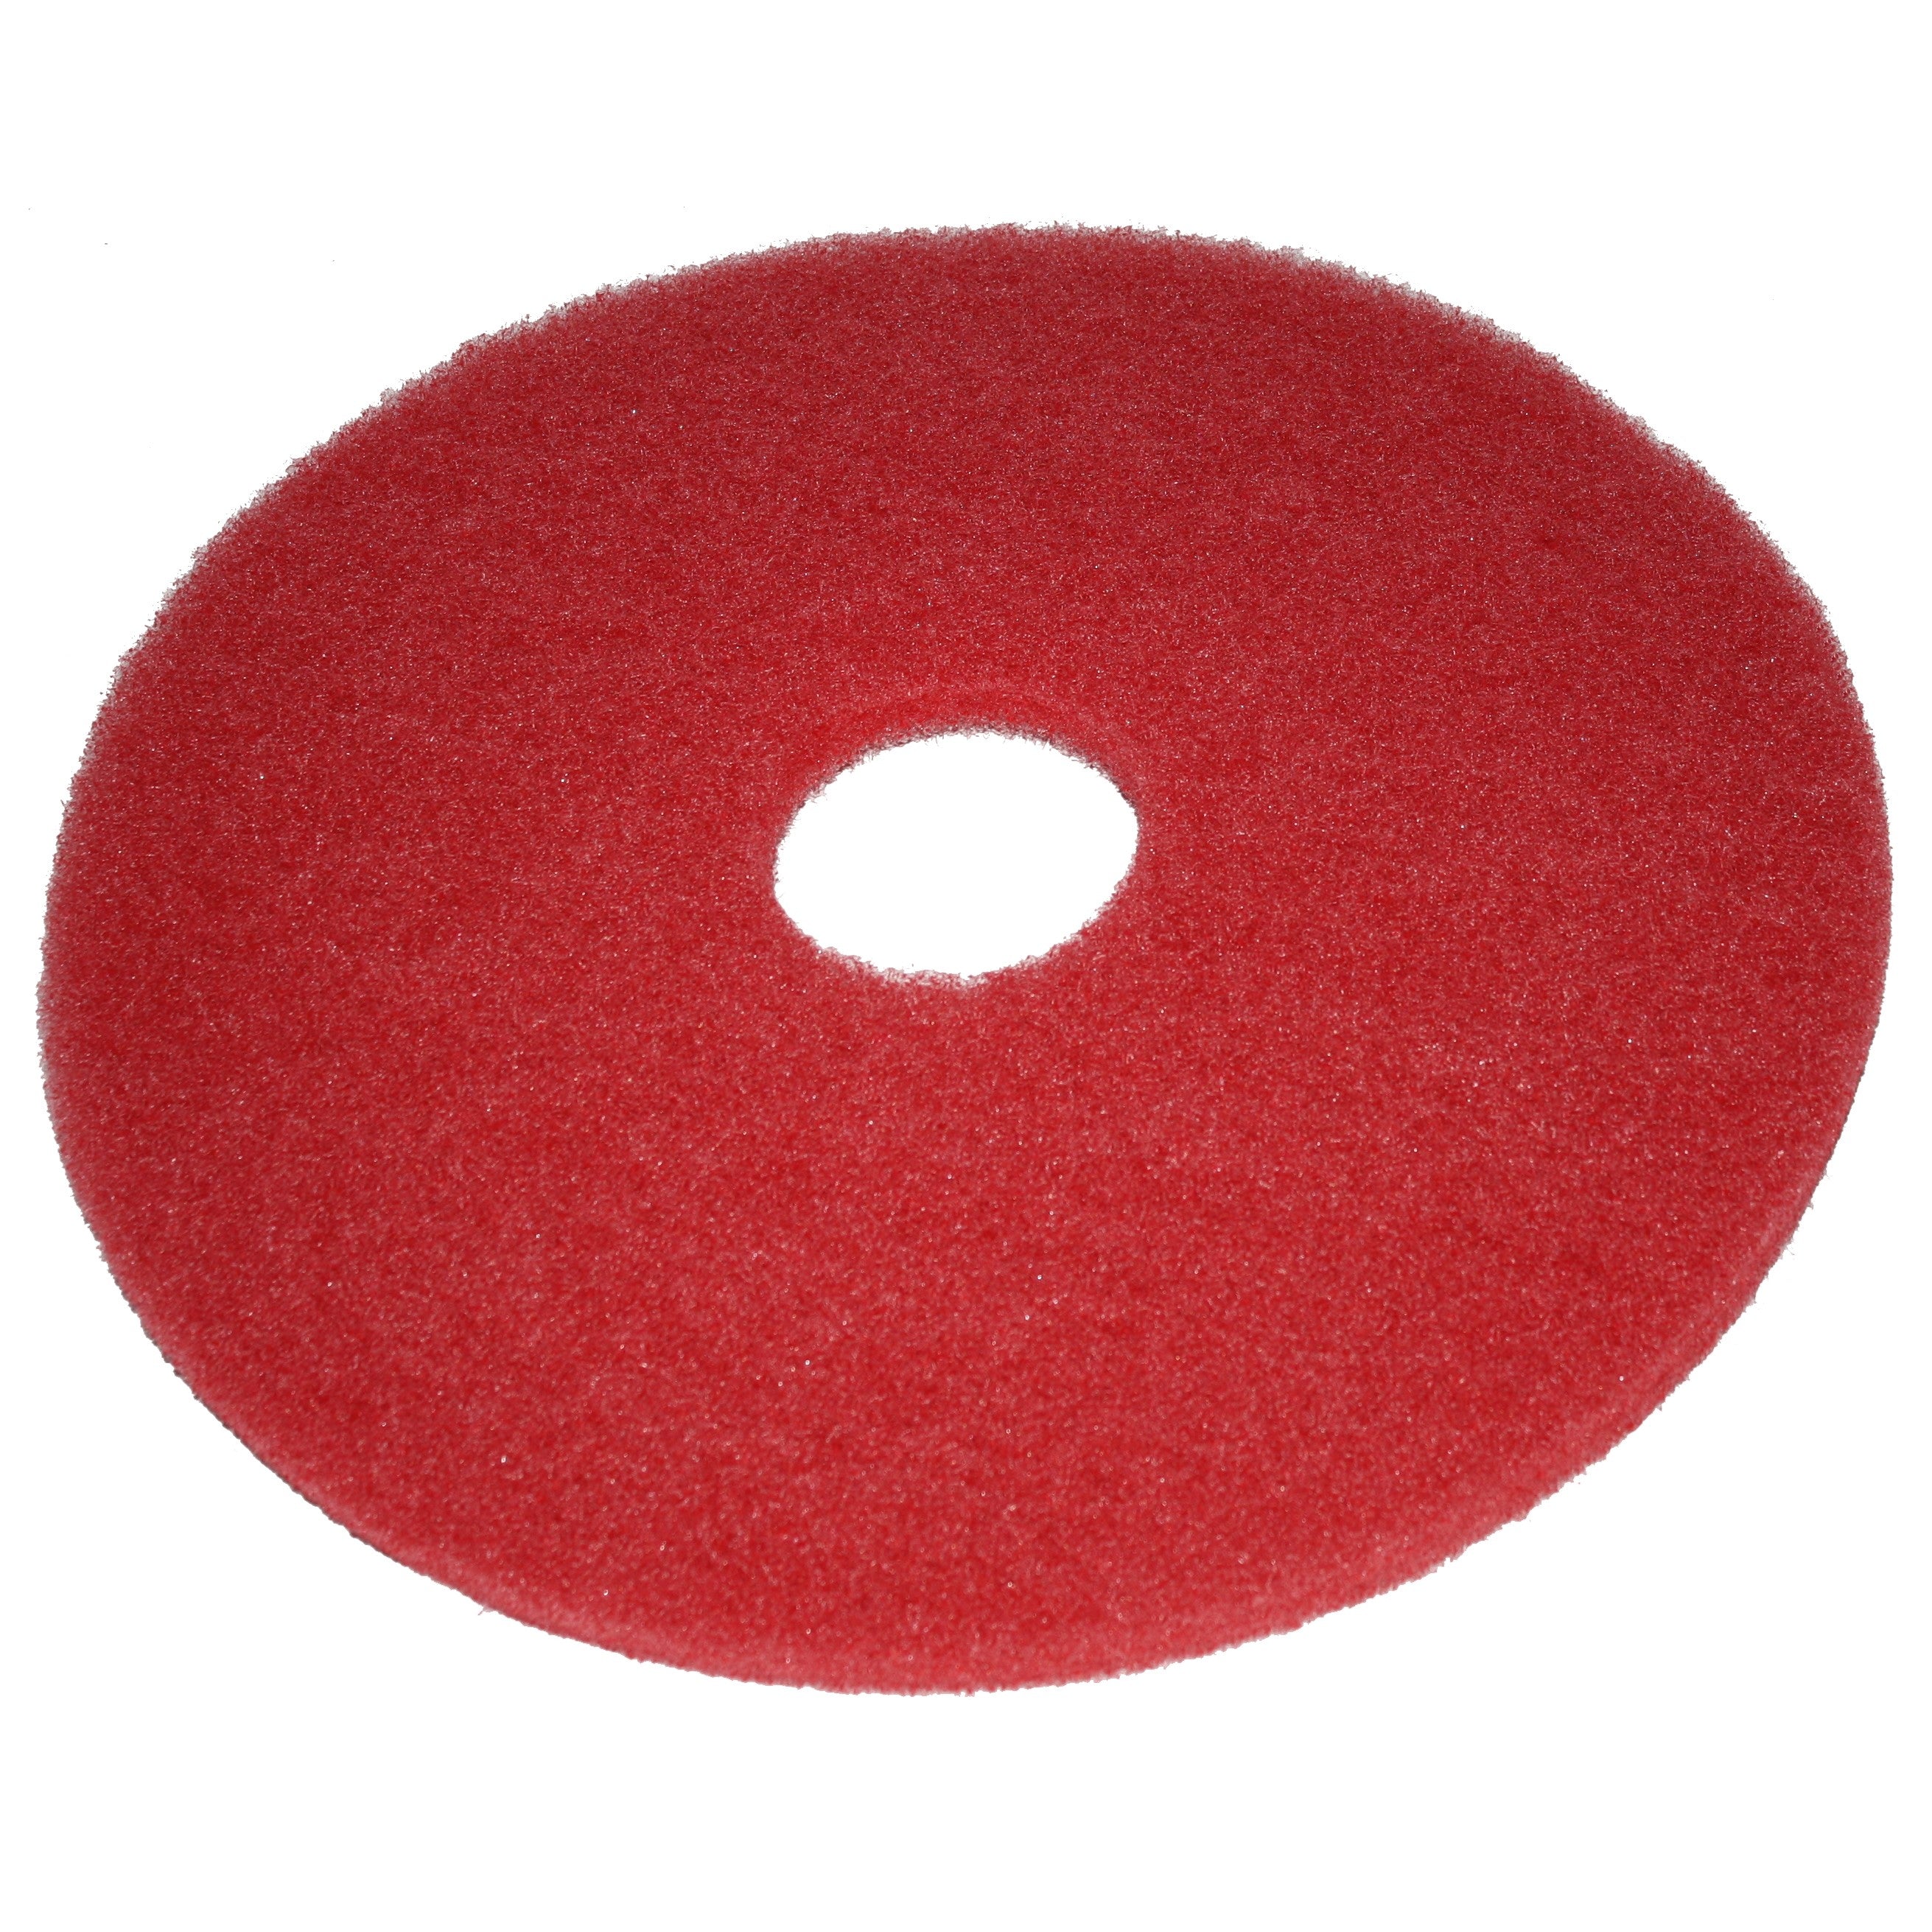 Pad rouge, Ø 381 mm, polyester